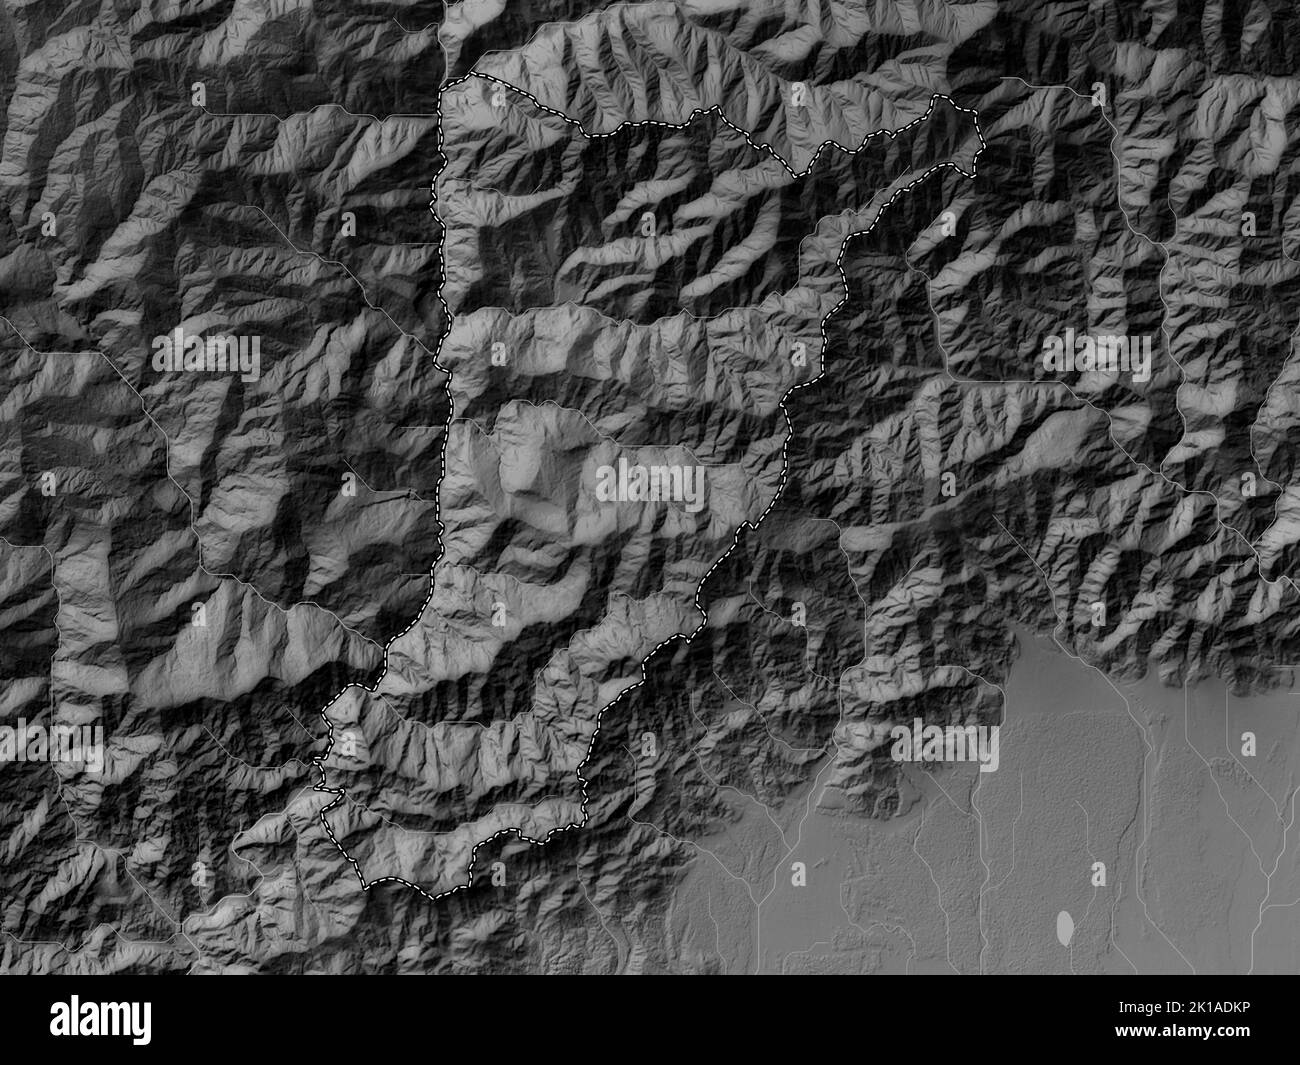 Tsirang, district of Bhutan. Grayscale elevation map with lakes and rivers Stock Photo